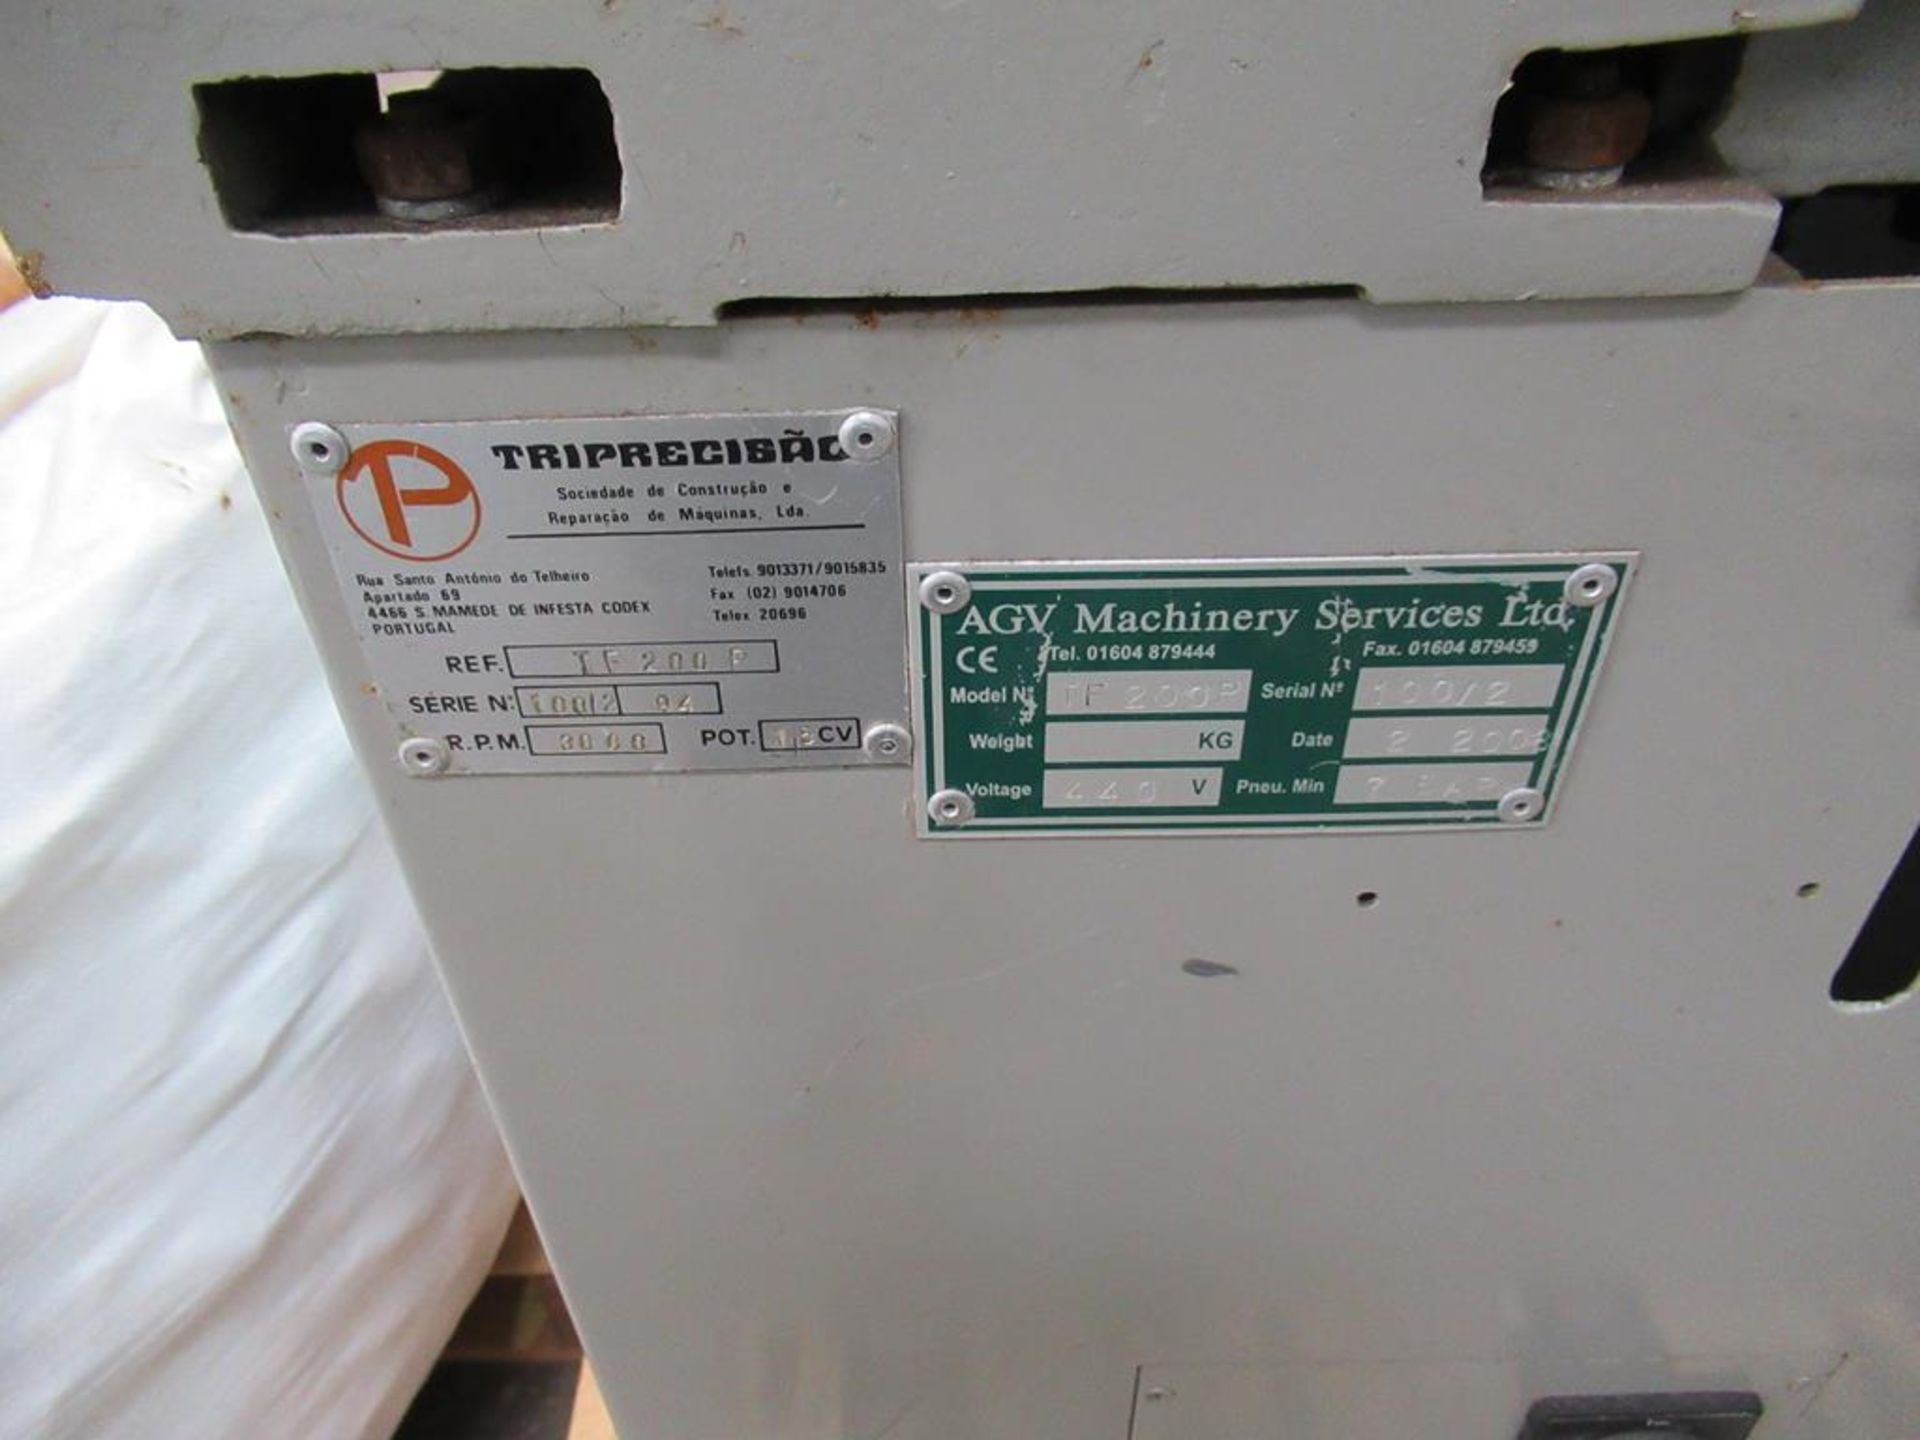 Triprecisao TF200P spindle copy router - Image 2 of 2